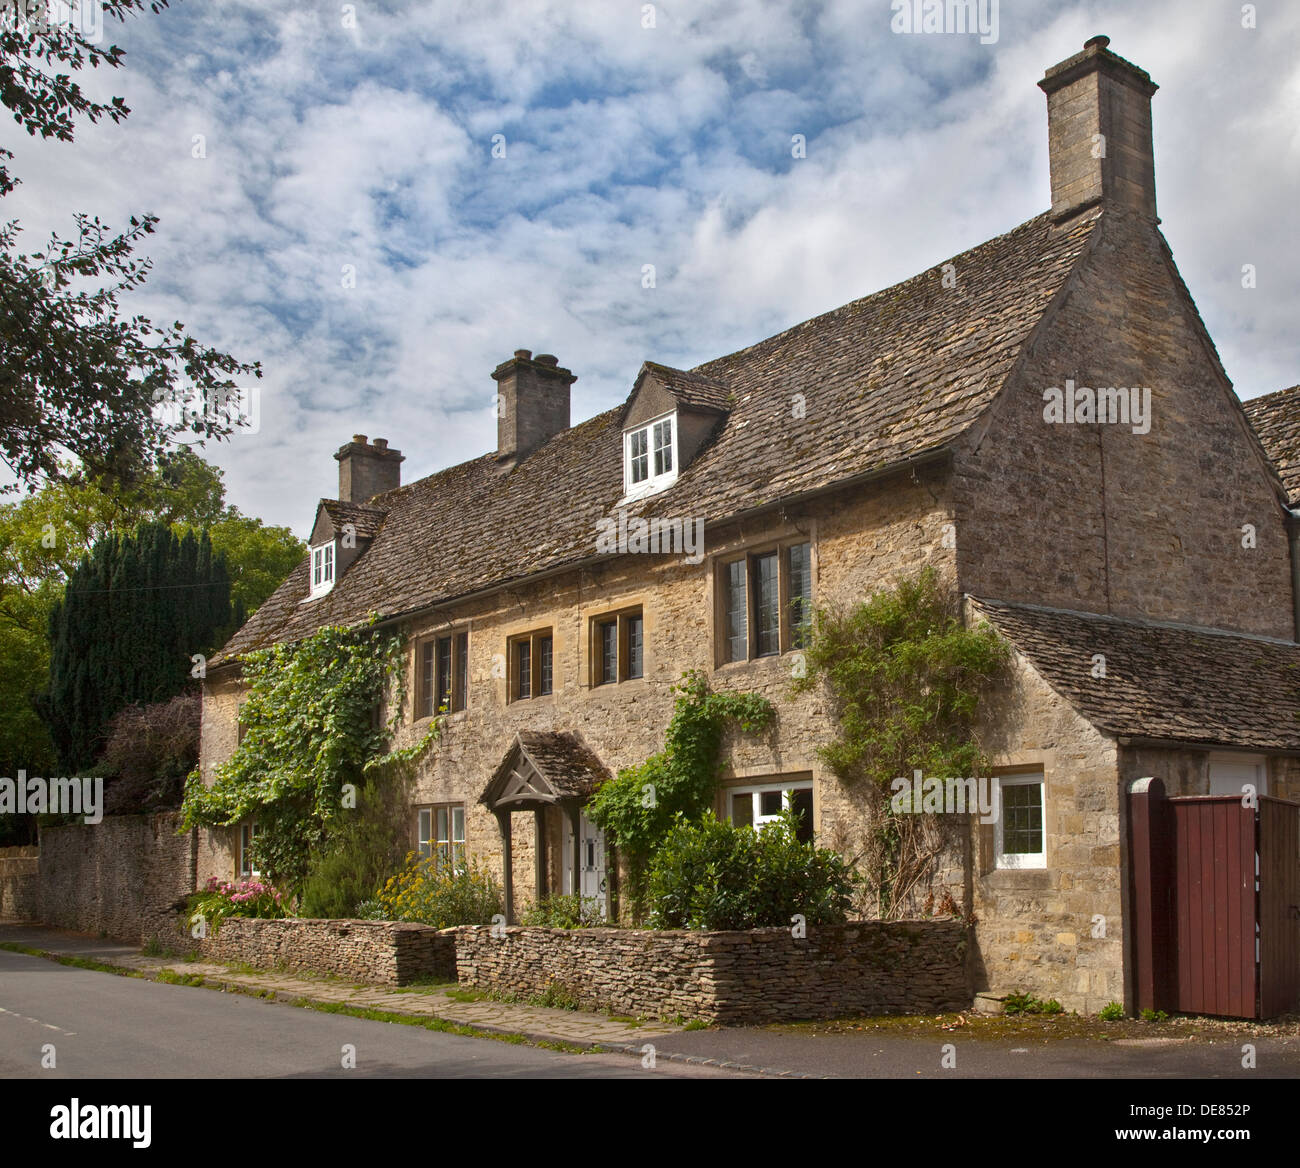 Cottages in Shilton, Oxfordshire, England Stock Photo